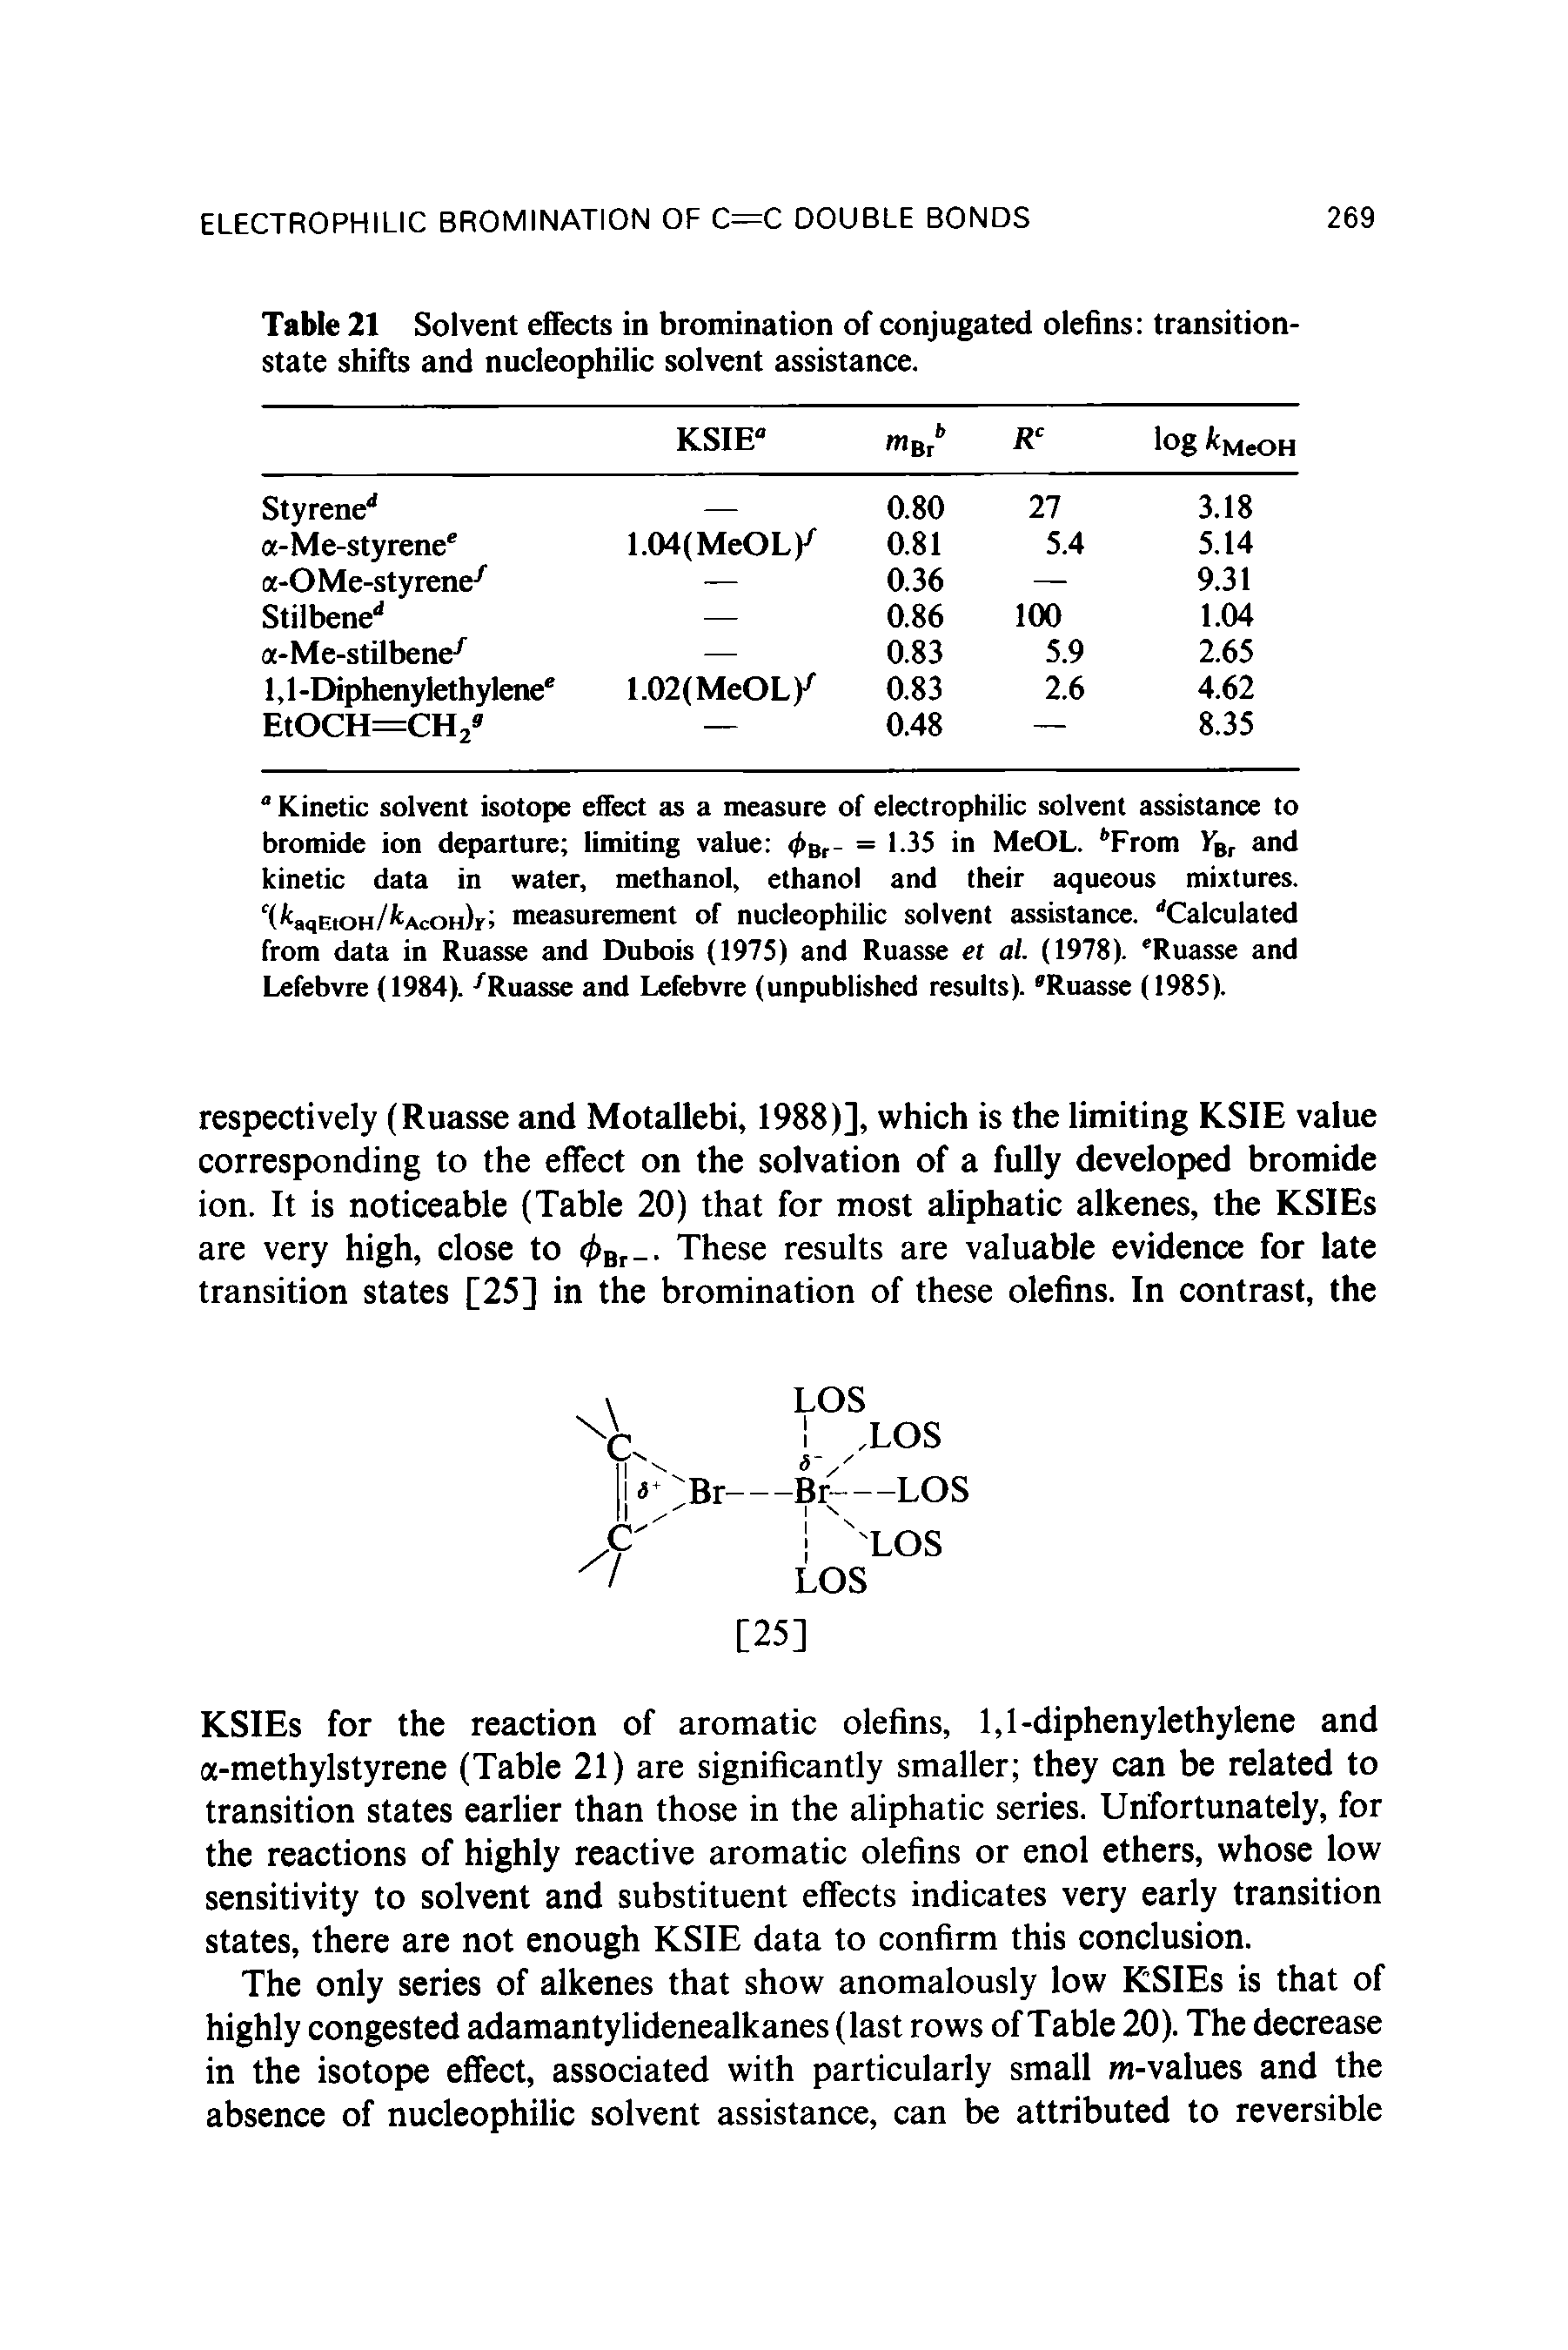 Table 21 Solvent effects in bromination of conjugated olefins transition-state shifts and nucleophilic solvent assistance.